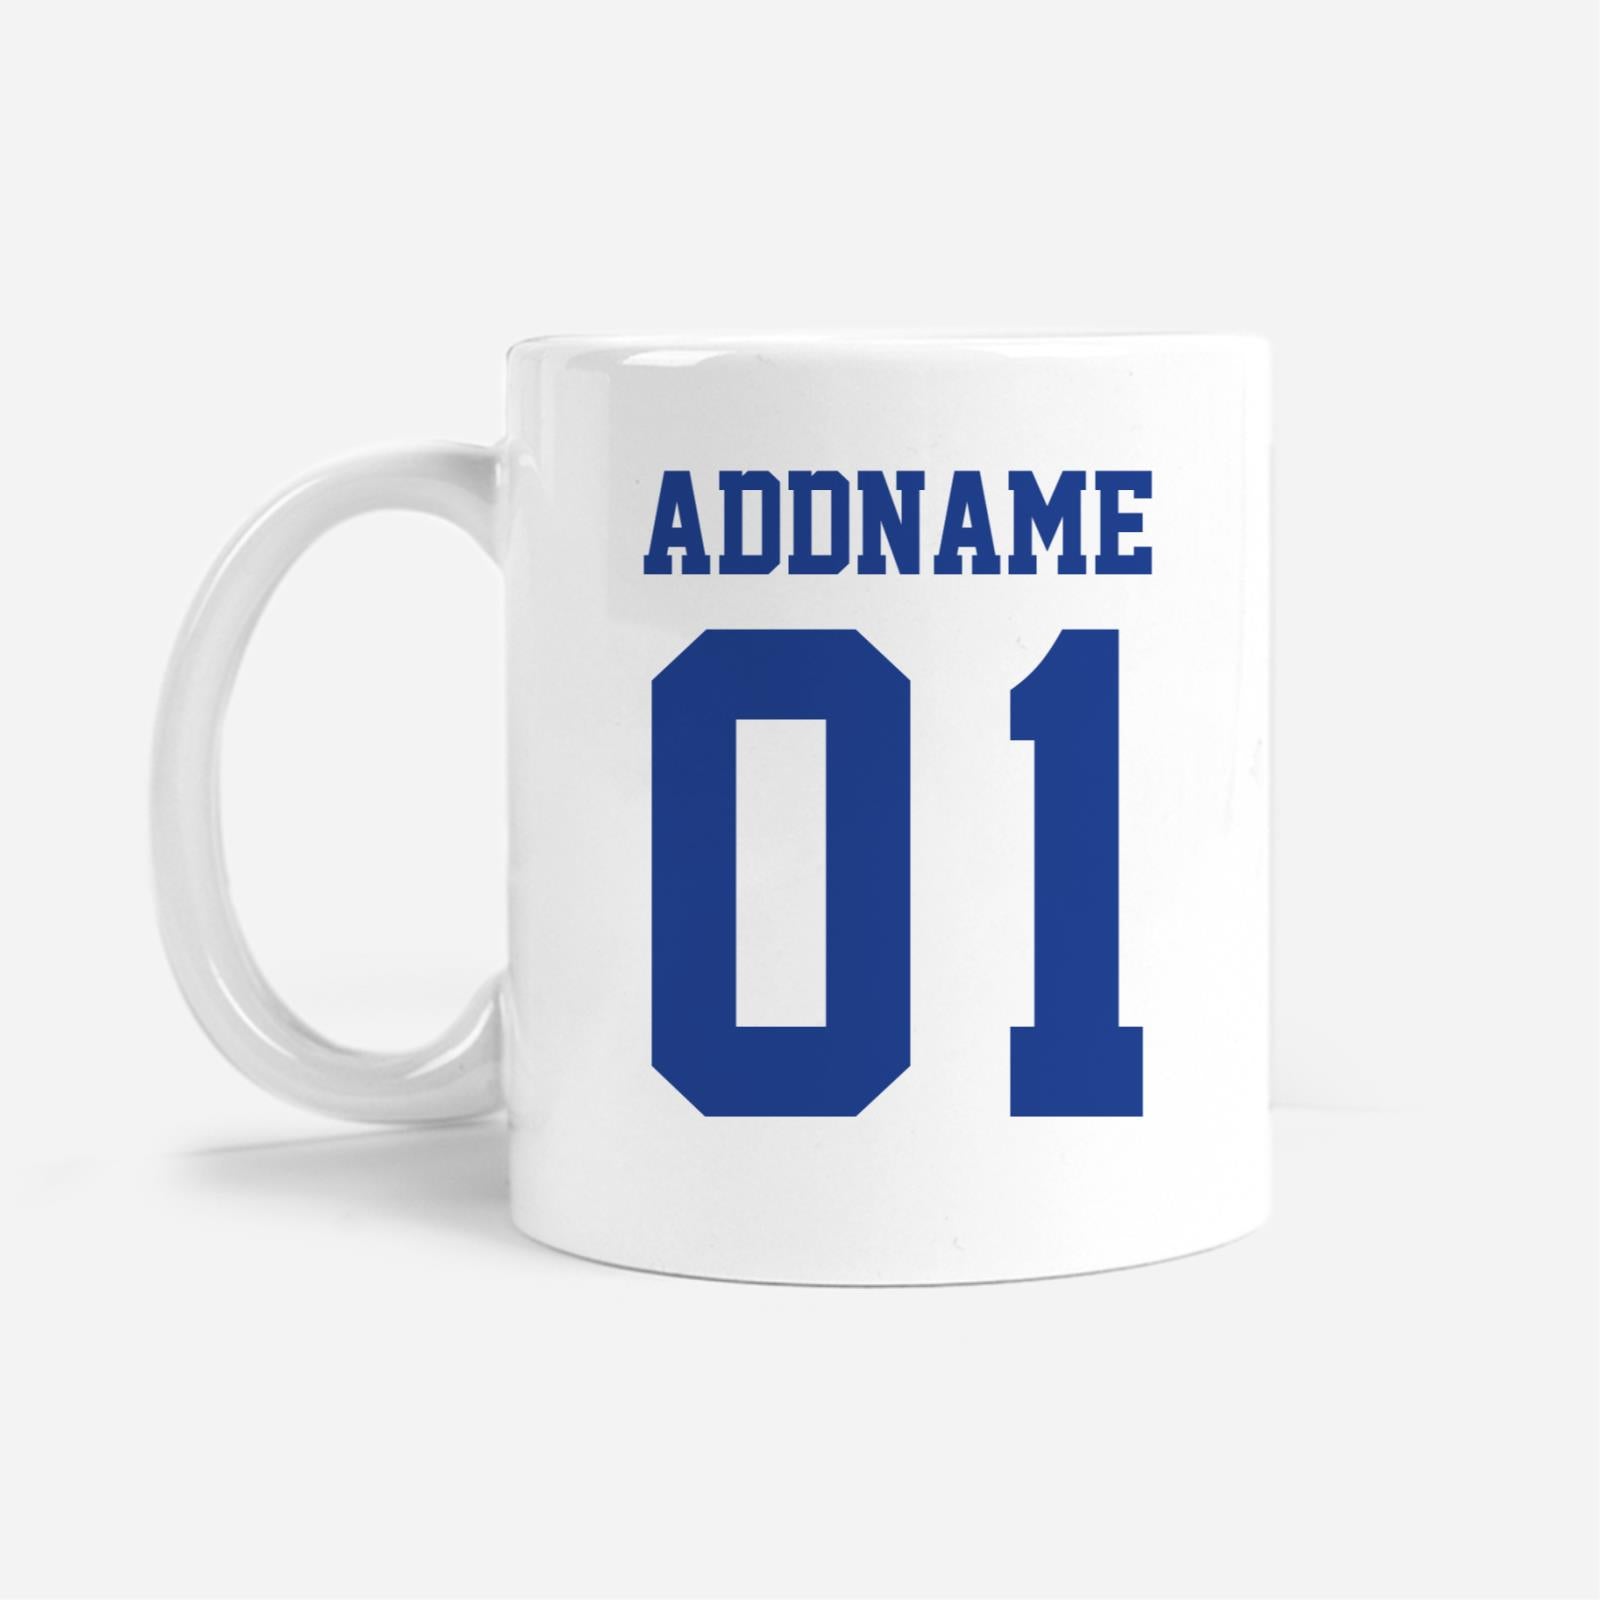 Real Madrid Football Fan Mug Personalizable with Name and Number